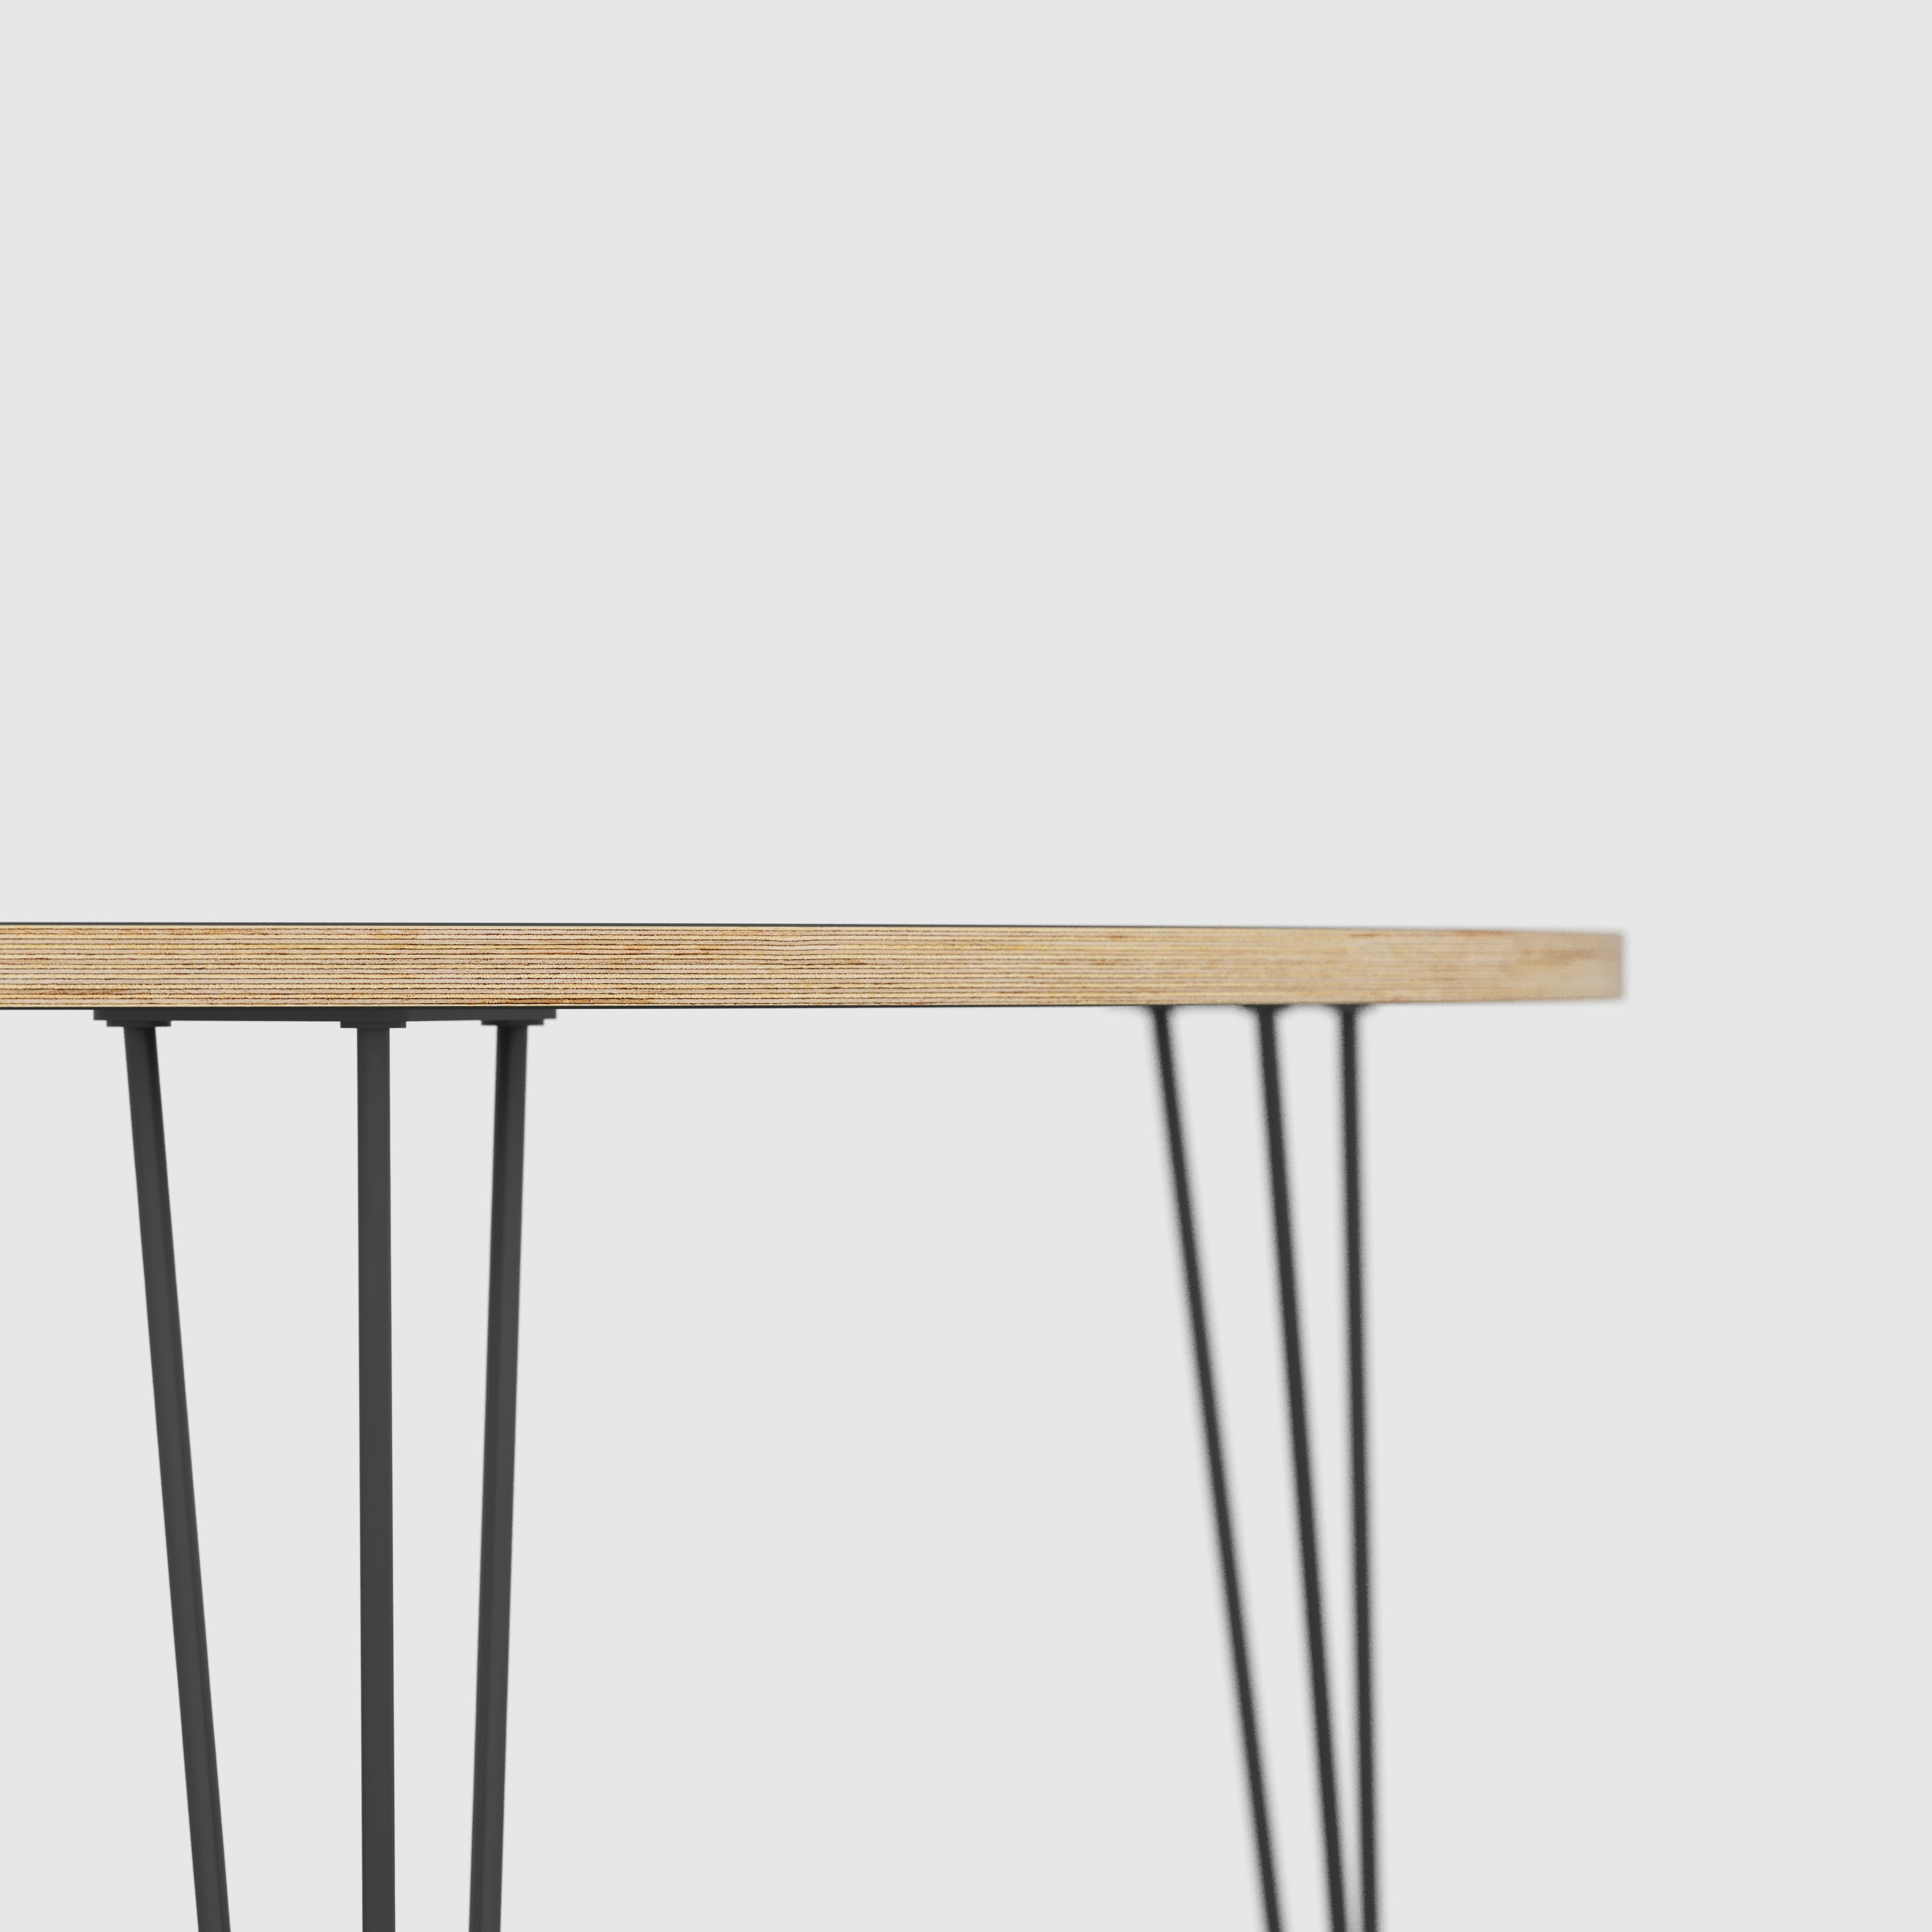 Round Table with Black Hairpin Legs - Plywood Birch - 1200(dia) x 735(h)